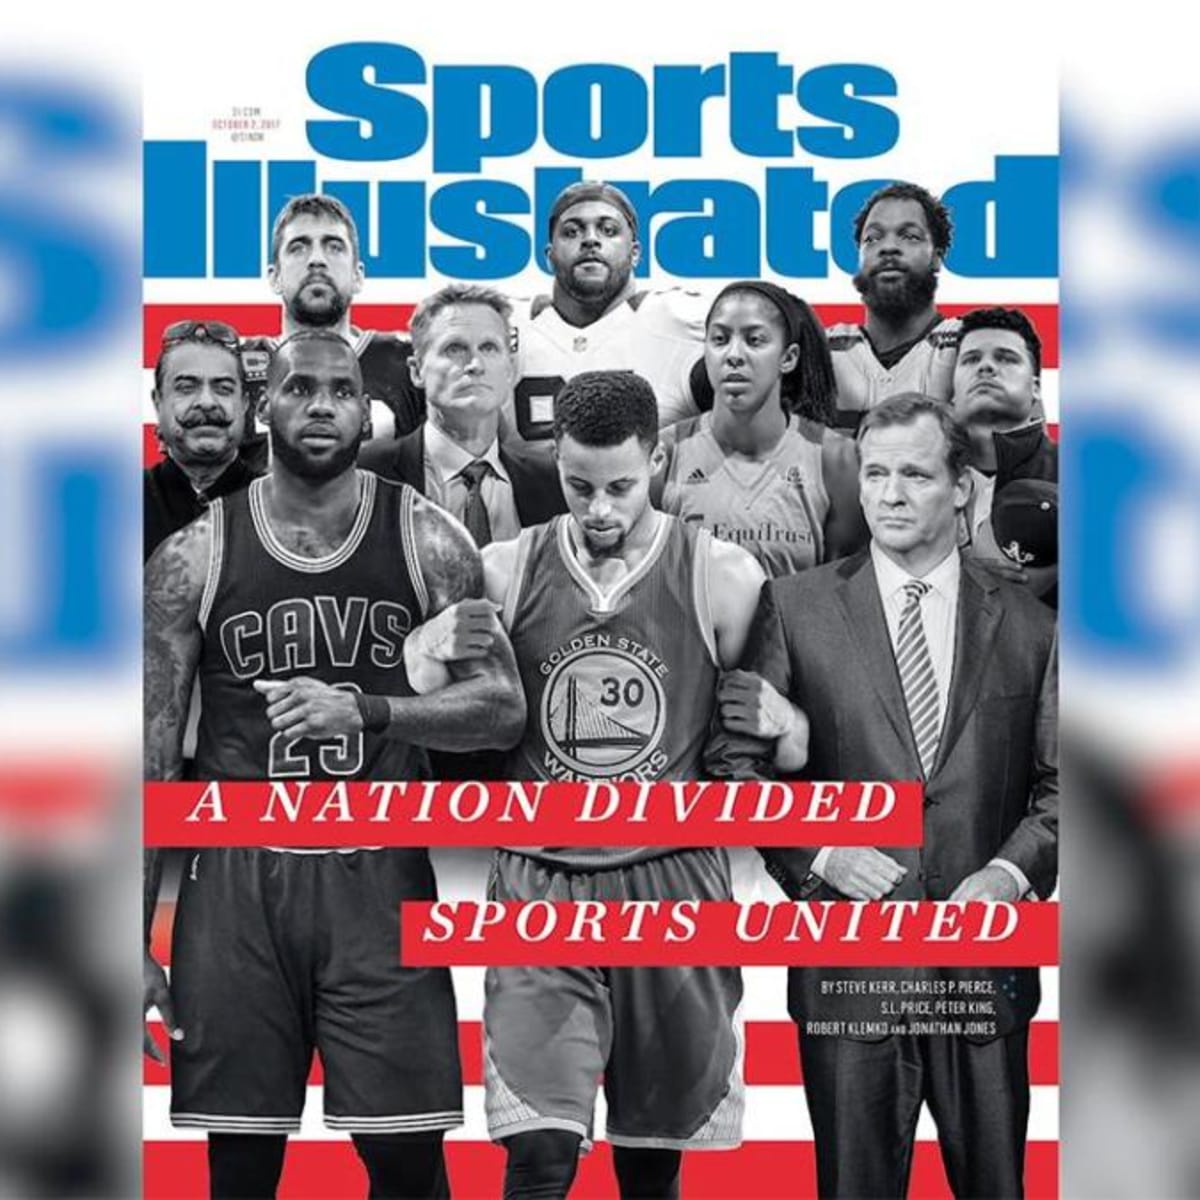 Sports Illustrated co-EIC Stephen Cannella talks SI covers